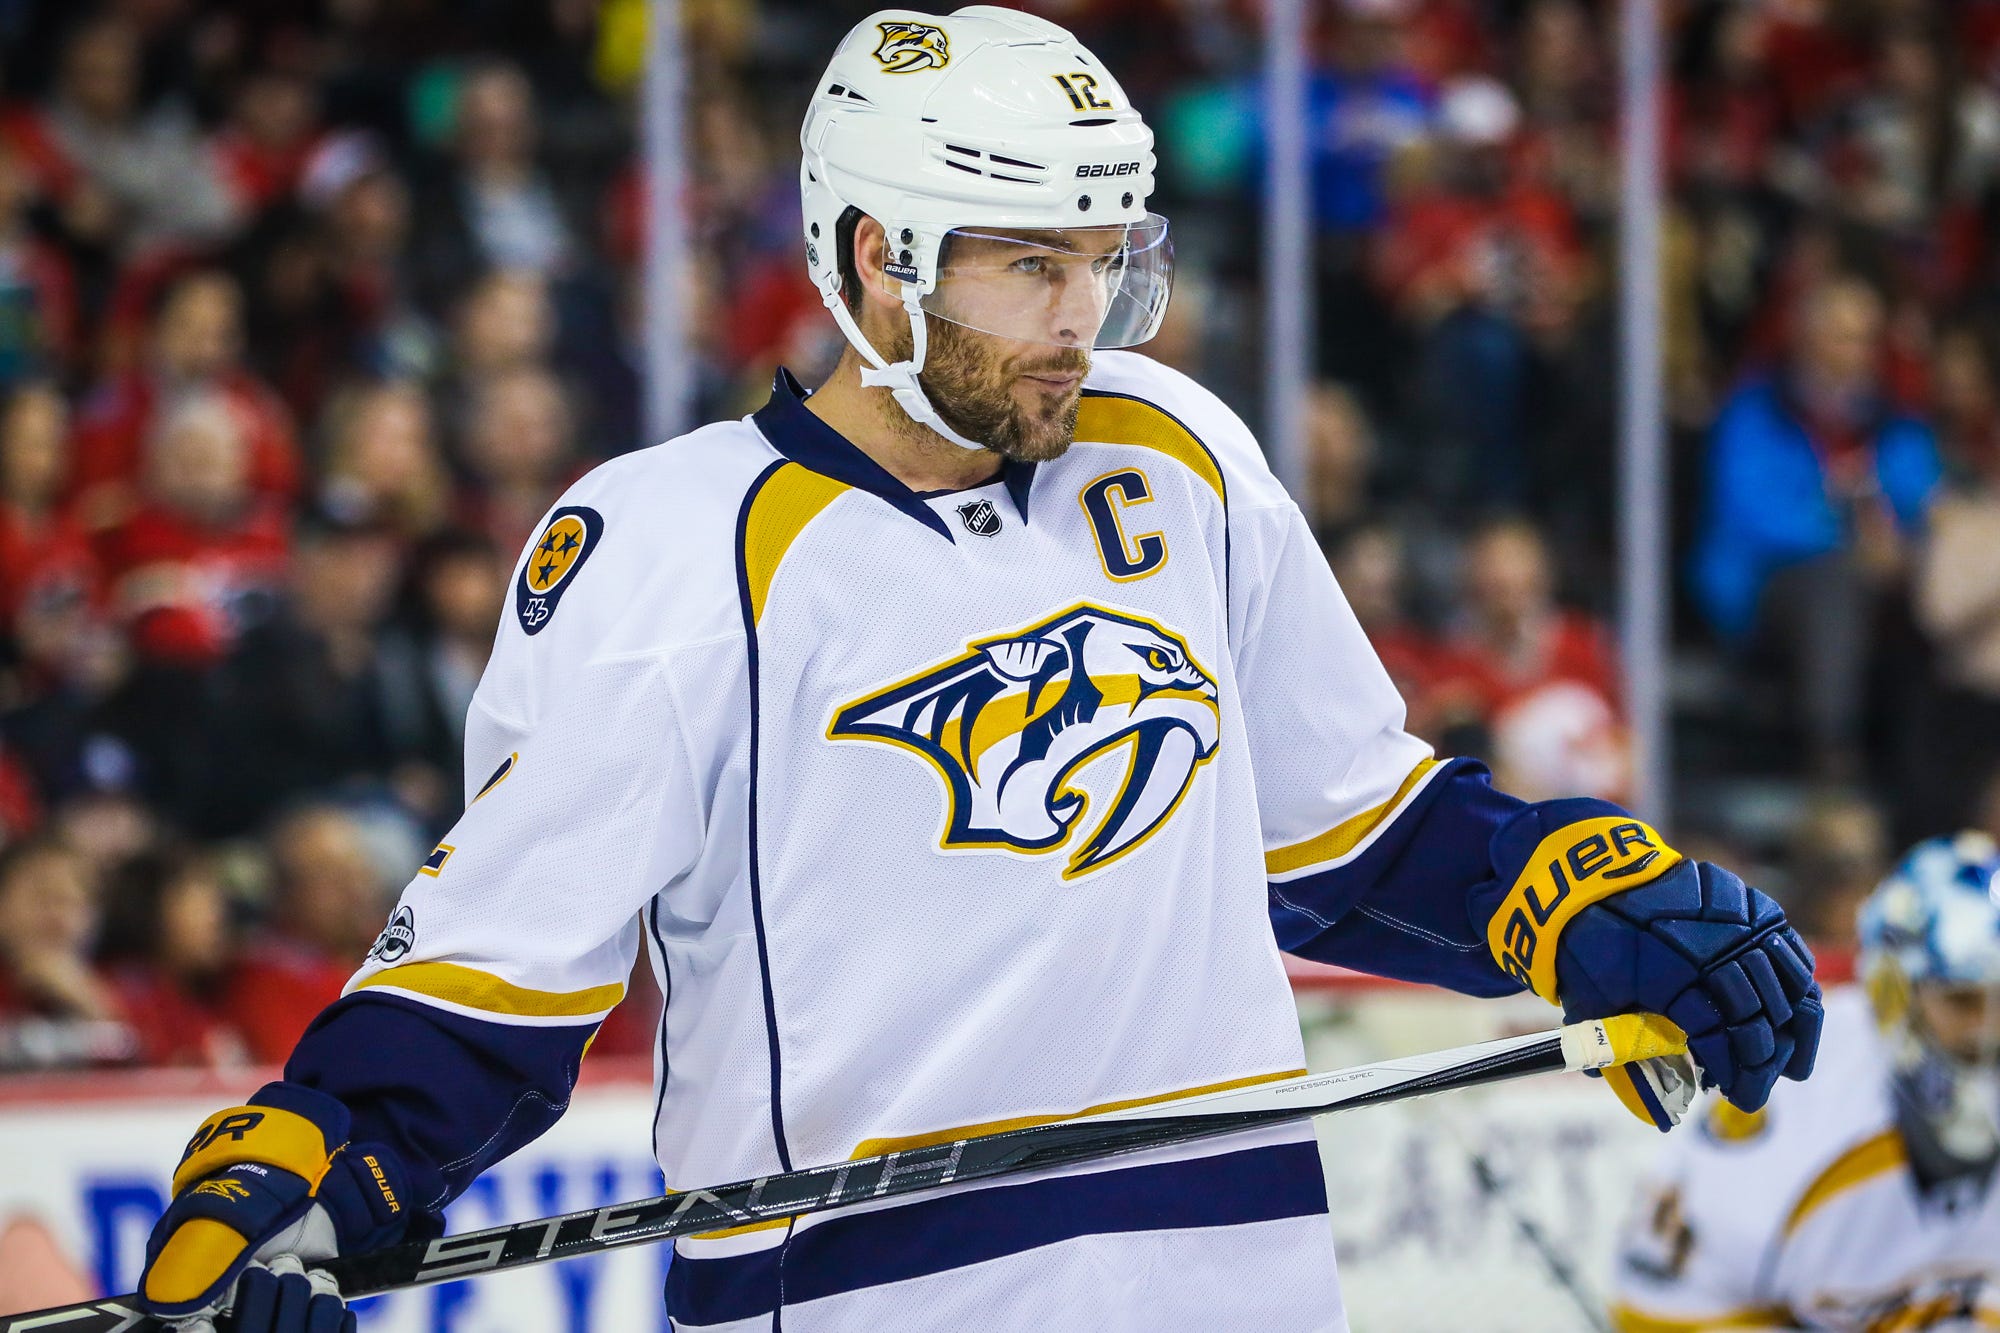 Mike Fisher to end retirement, return to Predators